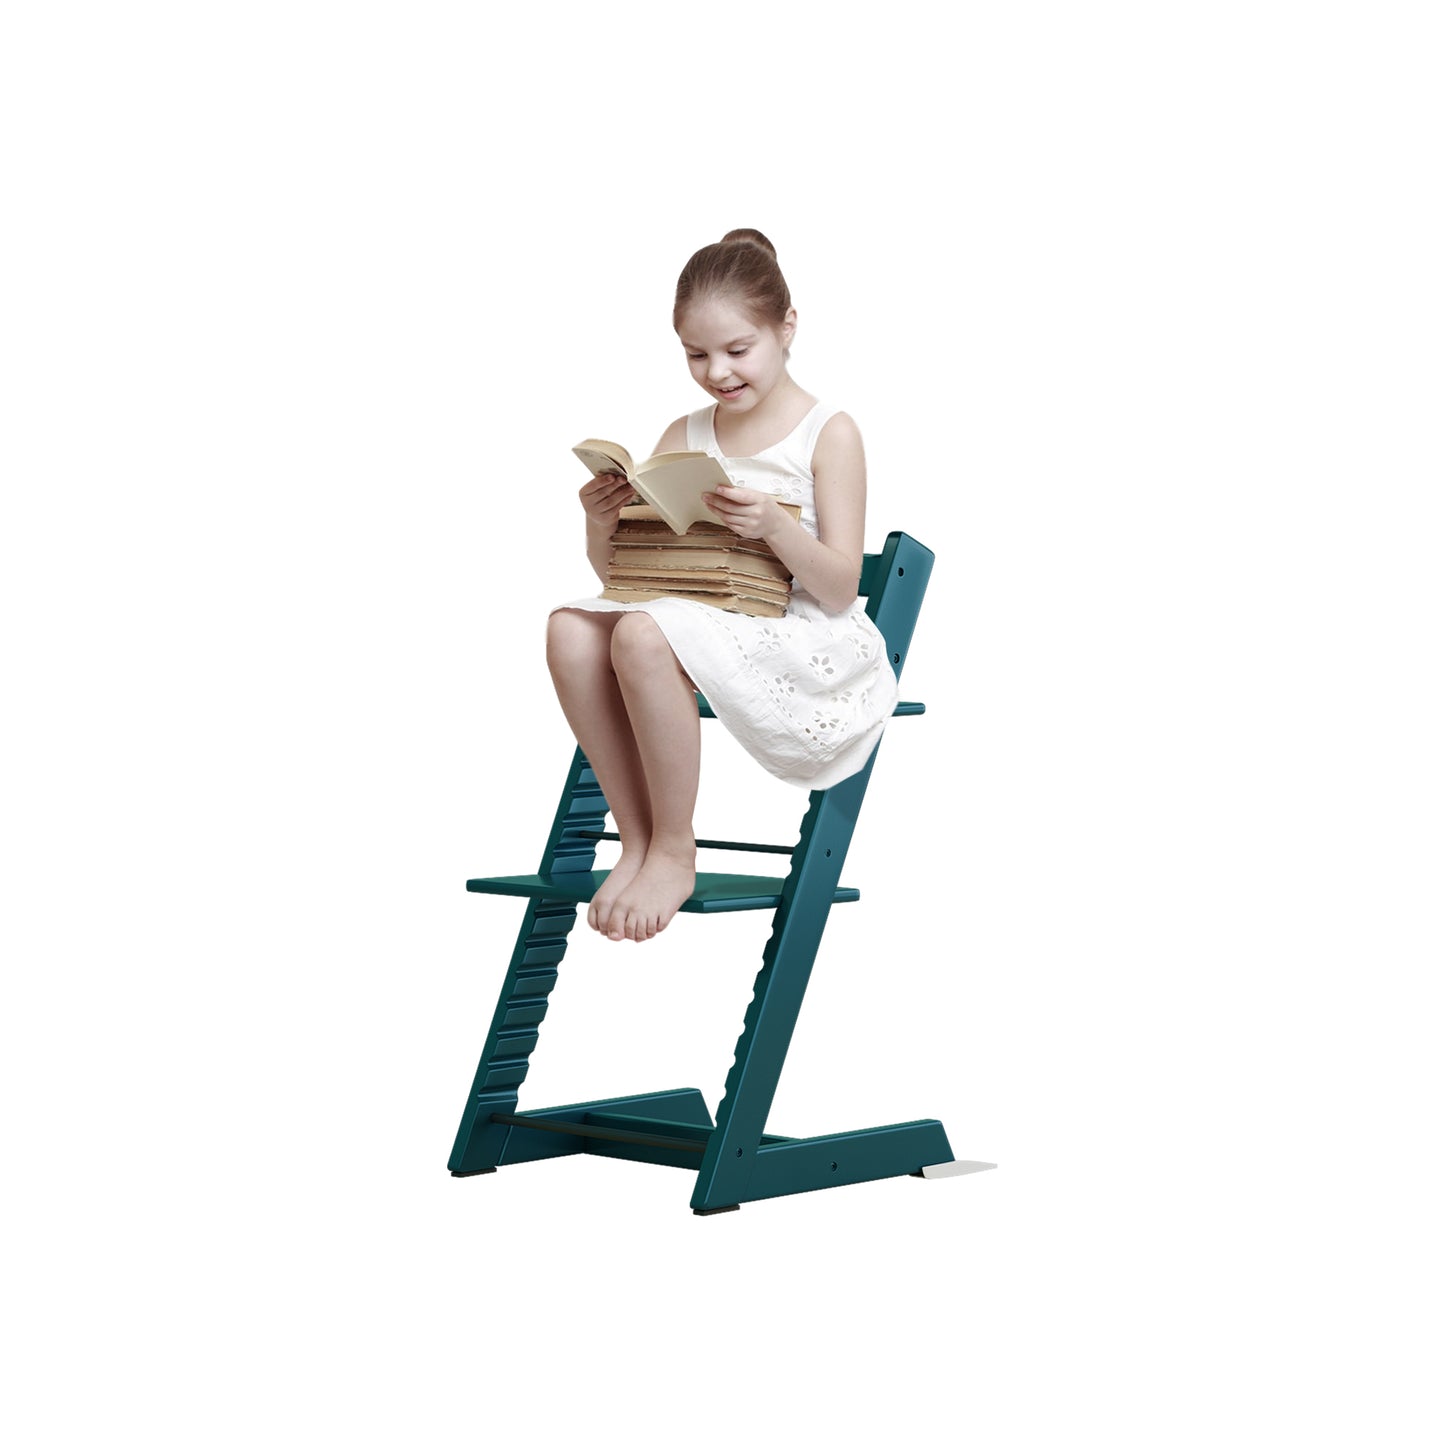 Adjustable solid wood beech environmental protection baby dining chair baby multi-functional solid wood learning bench